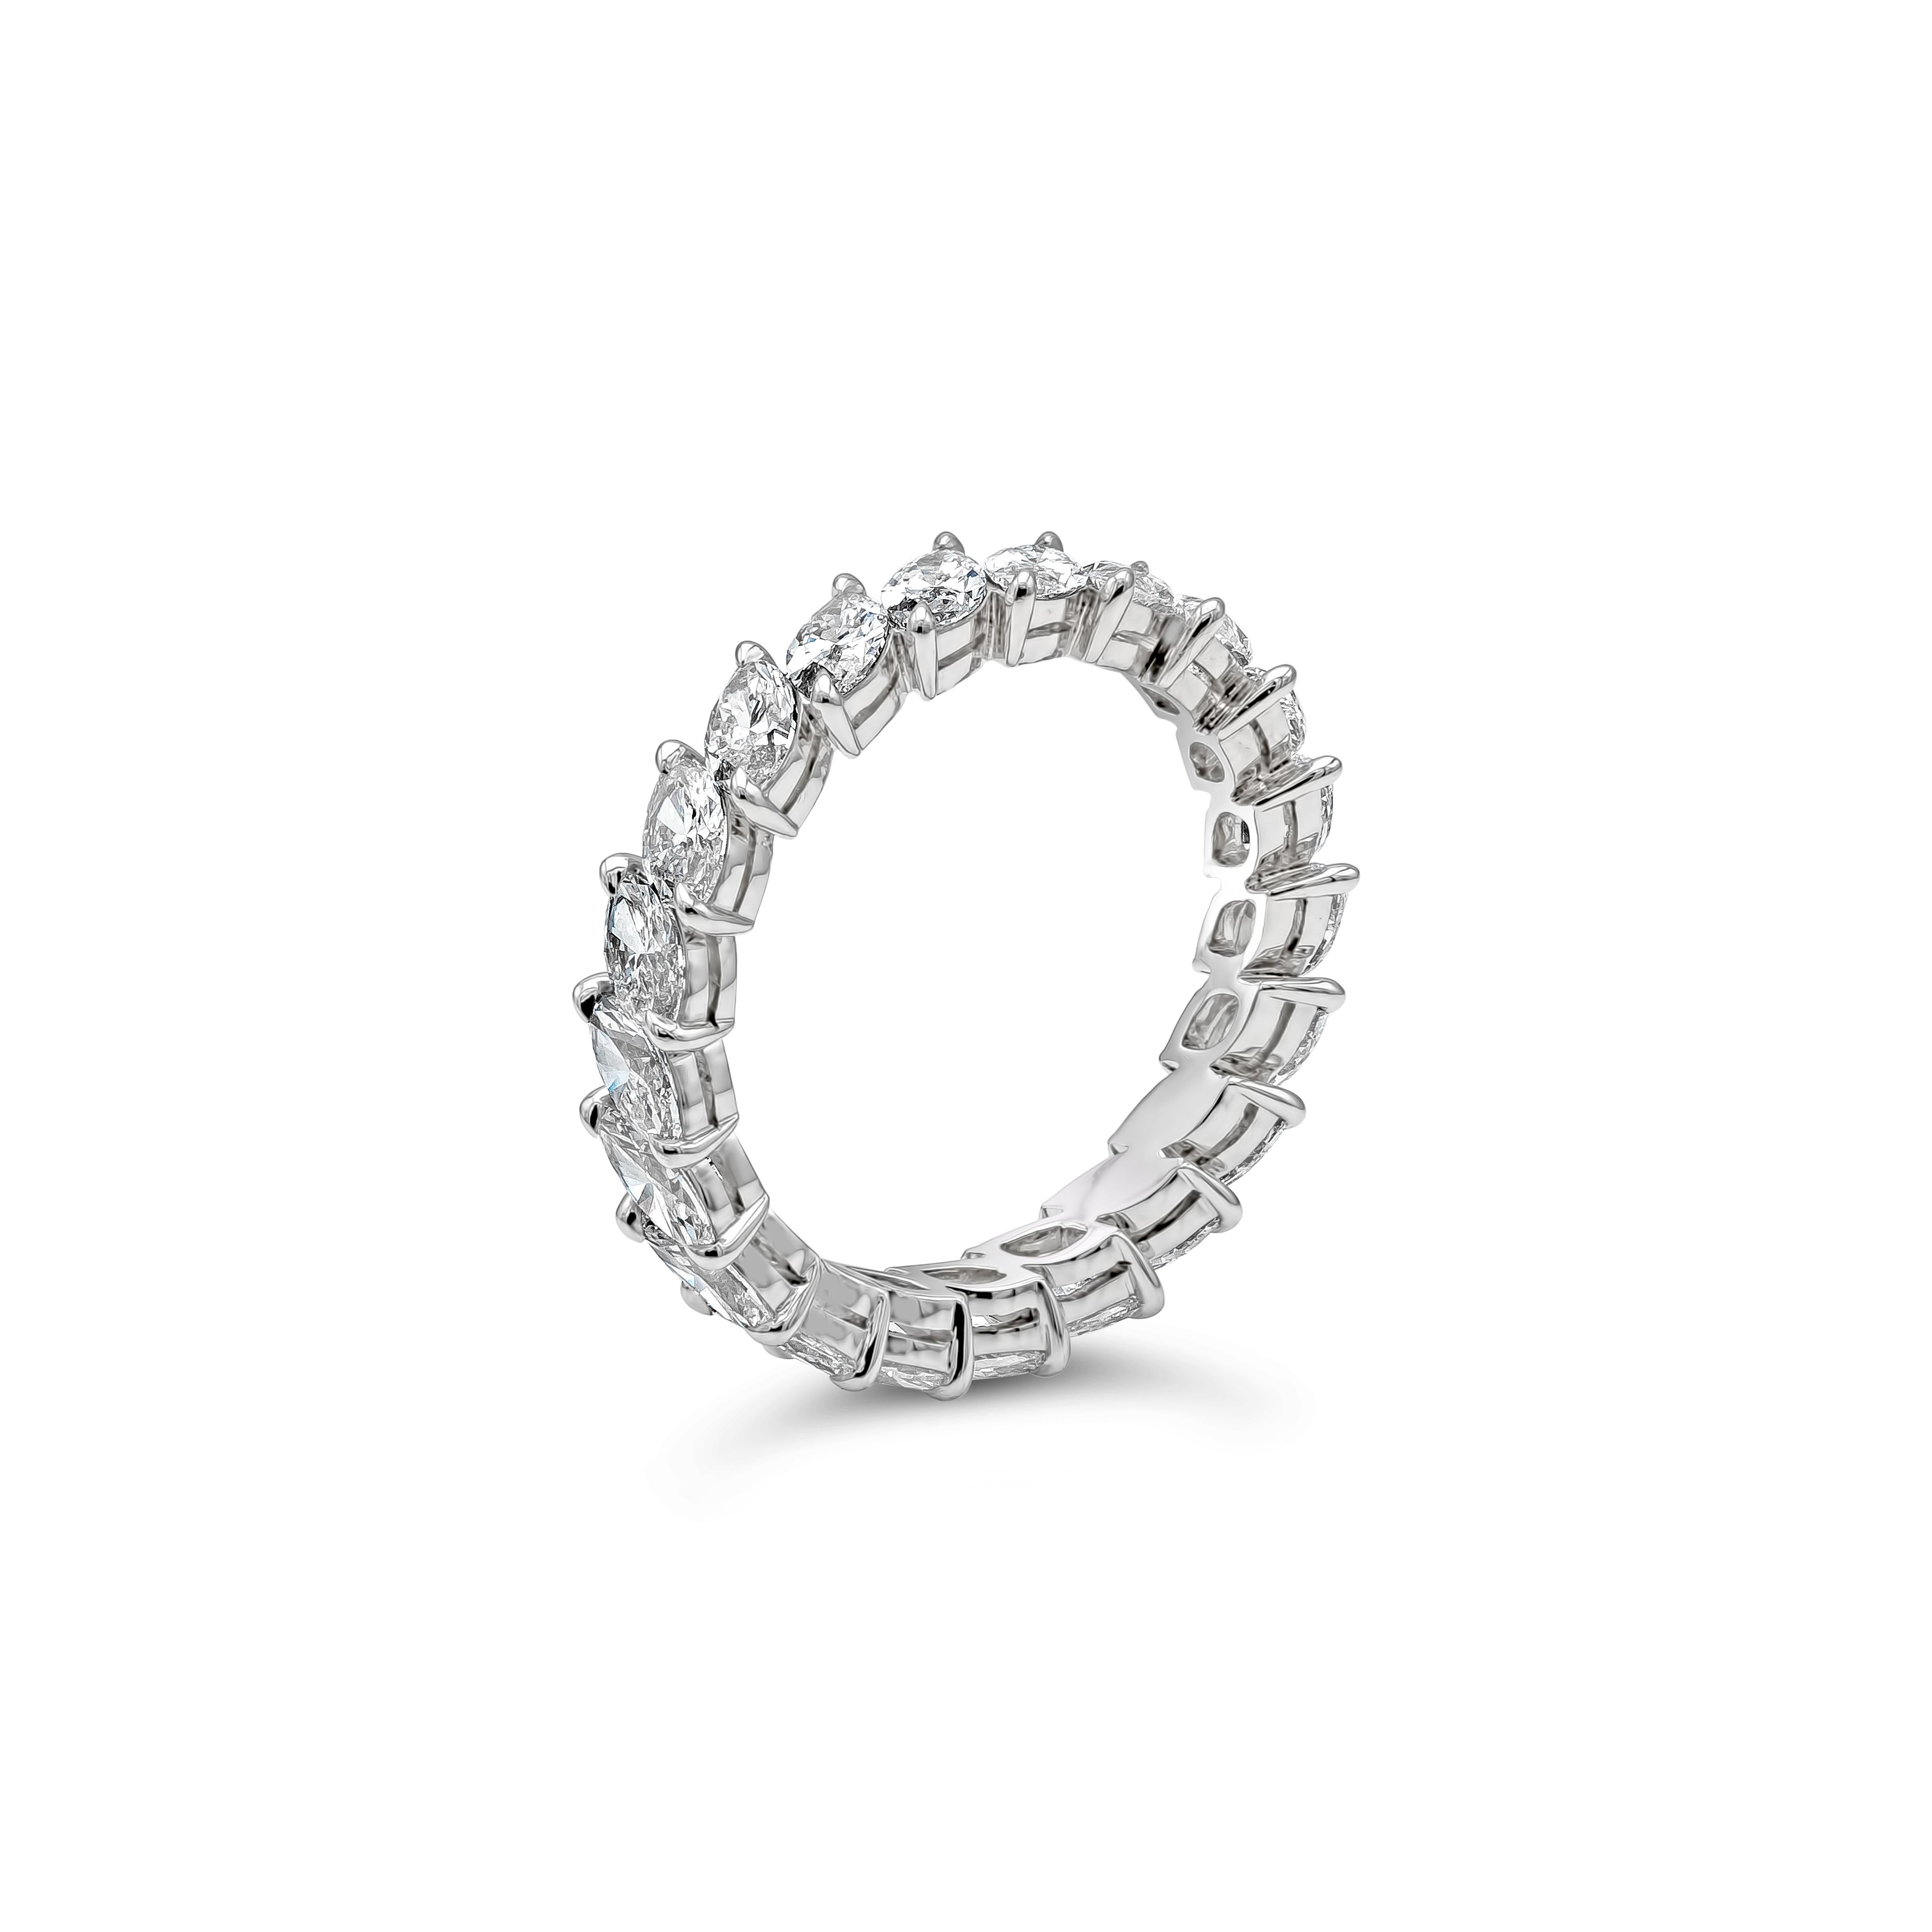 A brilliant and unique eternity band style featuring 21 brilliant marquise cut diamonds set diagonally that weighs about 2.80 carats total G-H Color and VS+ Clarity. Made with  Platinum. Size 6.75 US.

Roman Malakov is a custom house, specializing